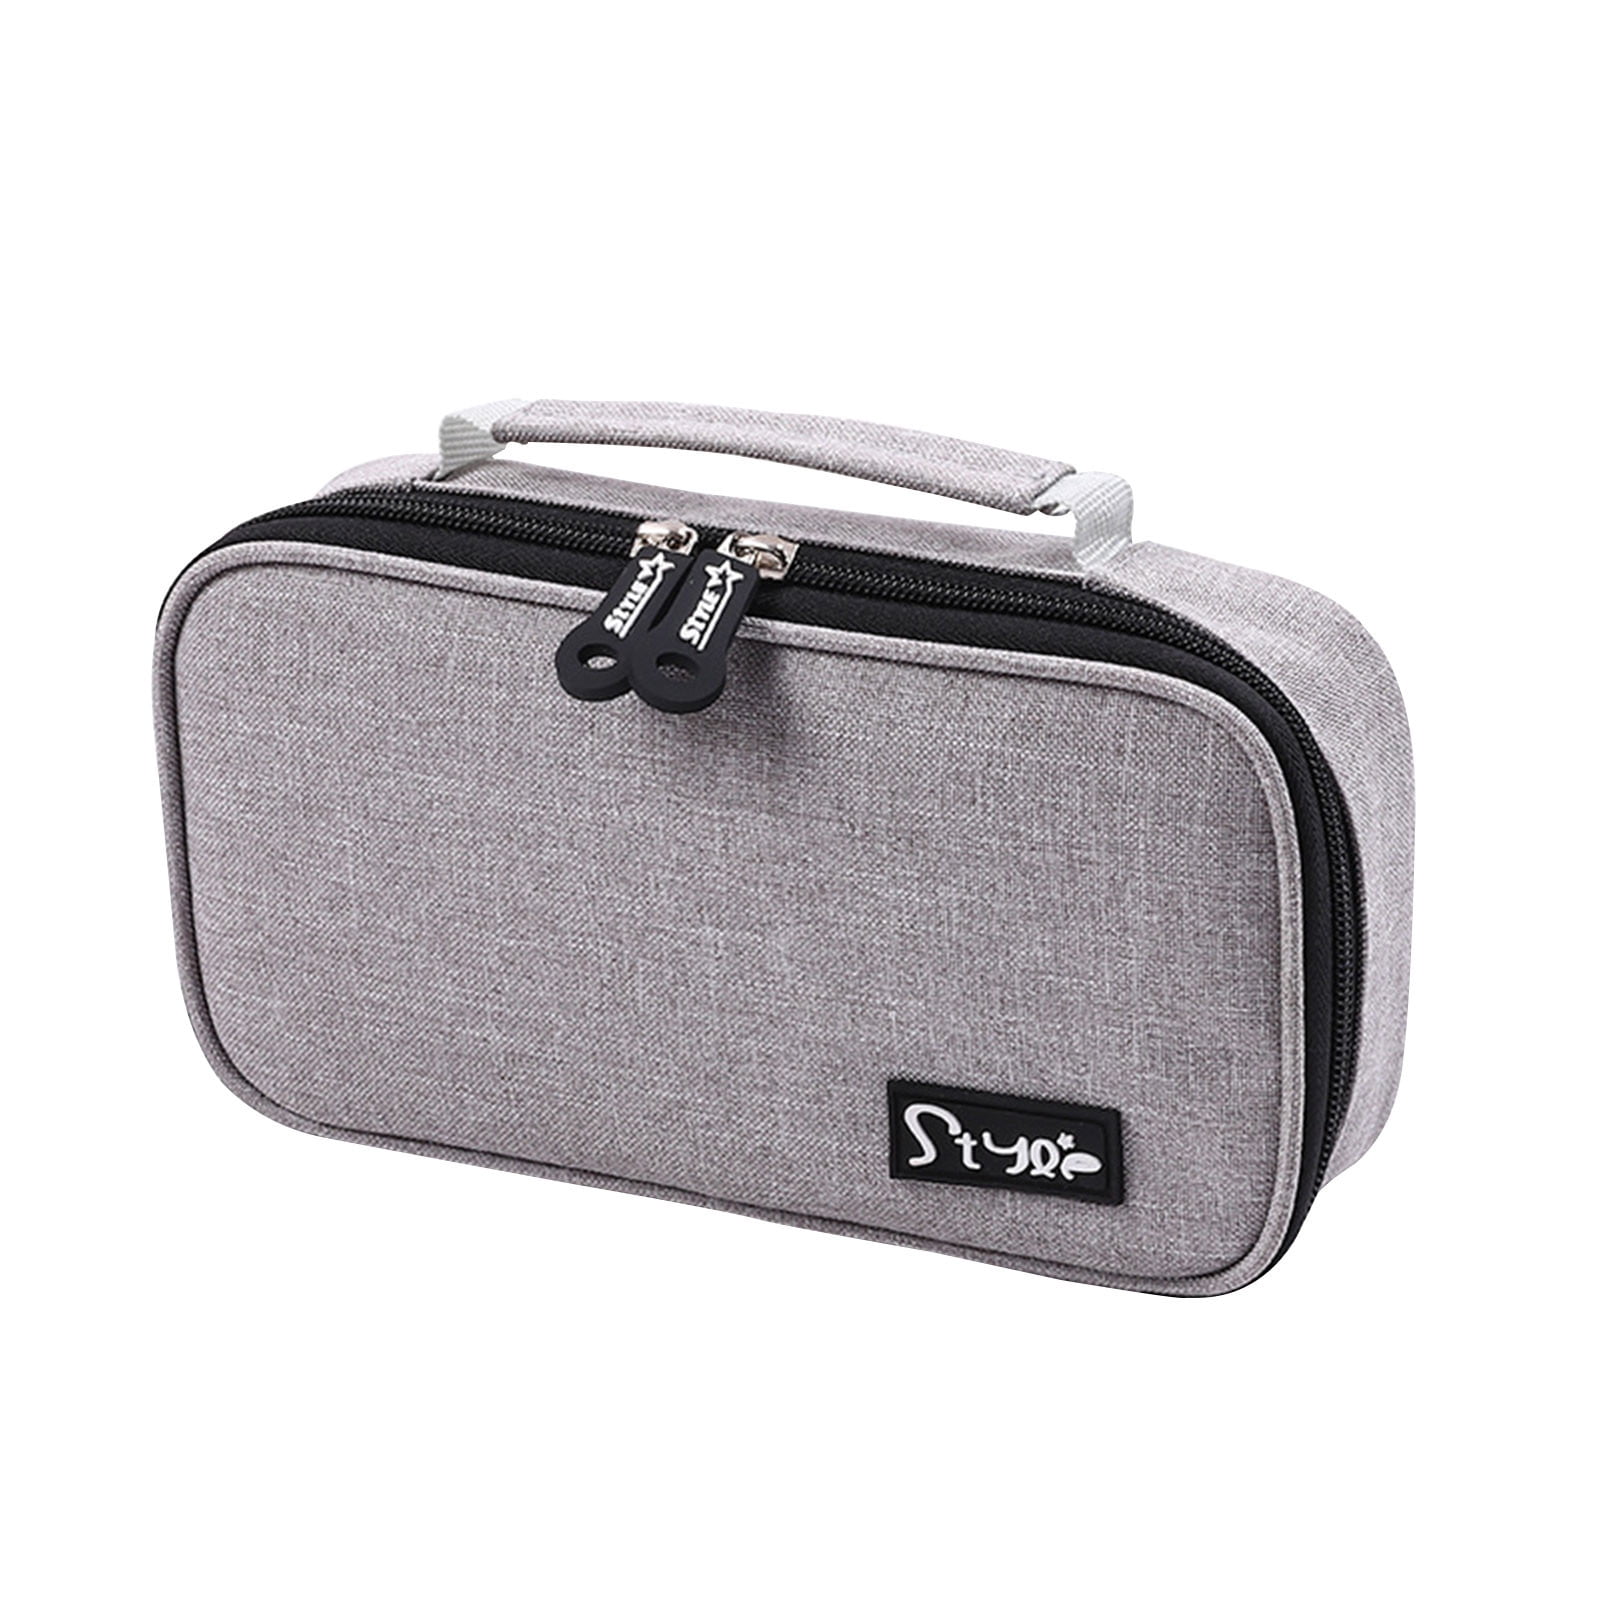  AISCOOL Big Capacity Pencil Case Pen Pouch Holder Bag  Stationery Box Large Storage EVA Hard Shell for School Supplies Office  Stuff (Grey) : Office Products